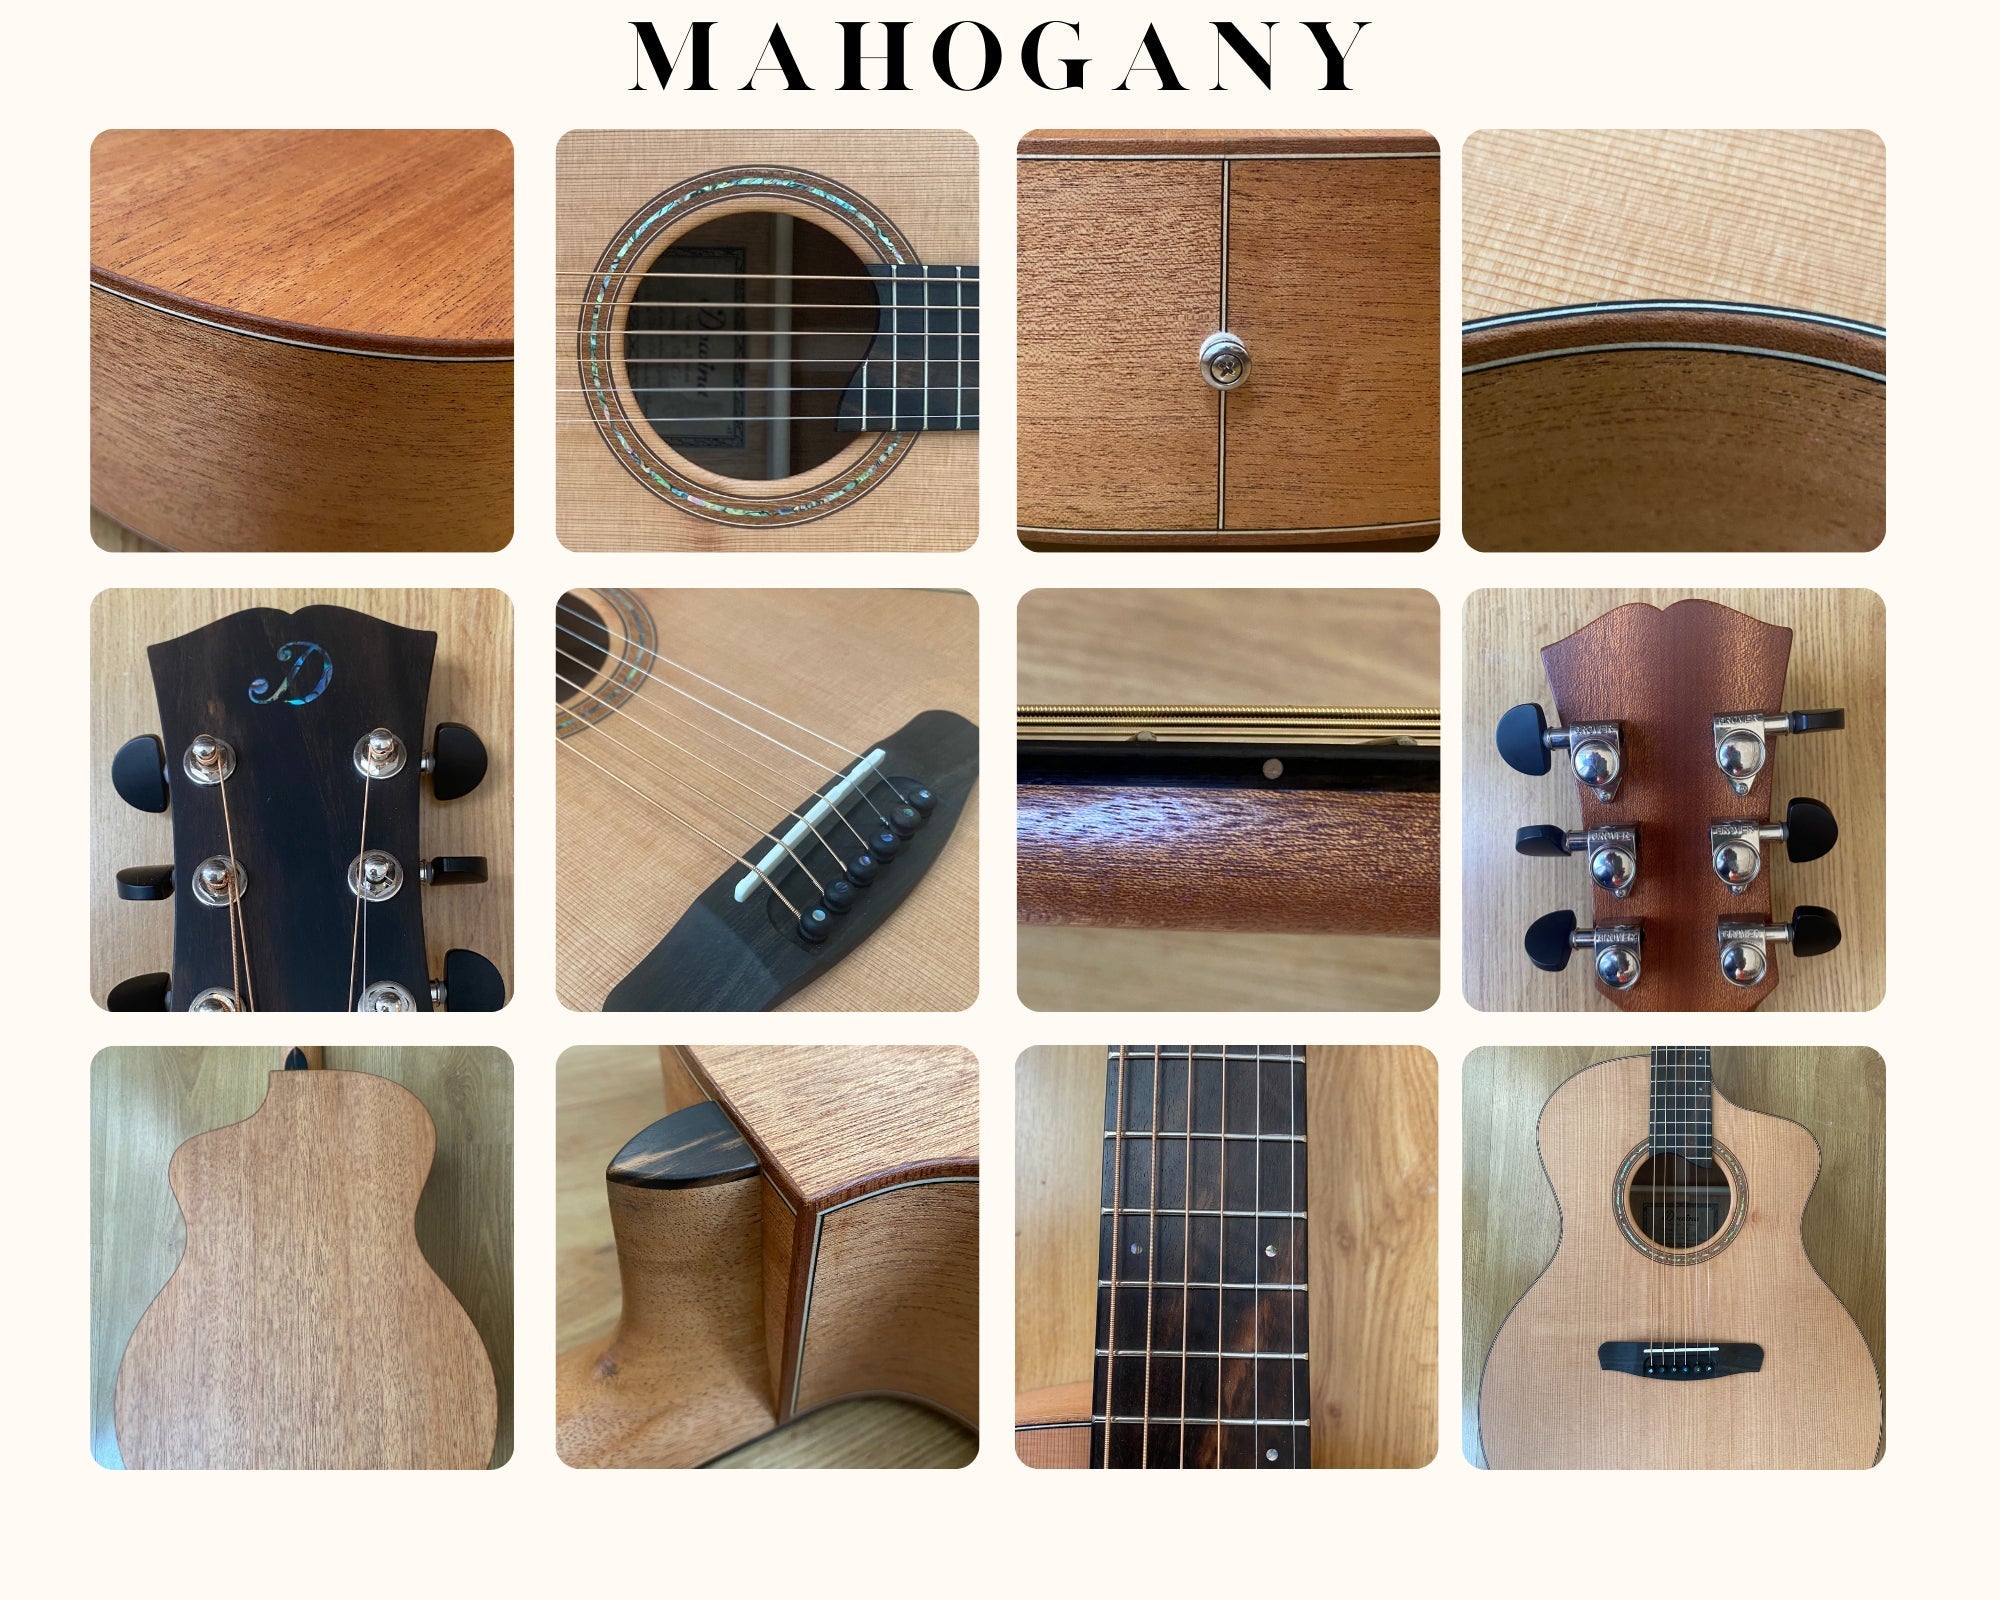 Dowina Mahogany GAC Deluxe (Torrified Gloss Swiss Moon Spruce), Acoustic Guitar for sale at Richards Guitars.